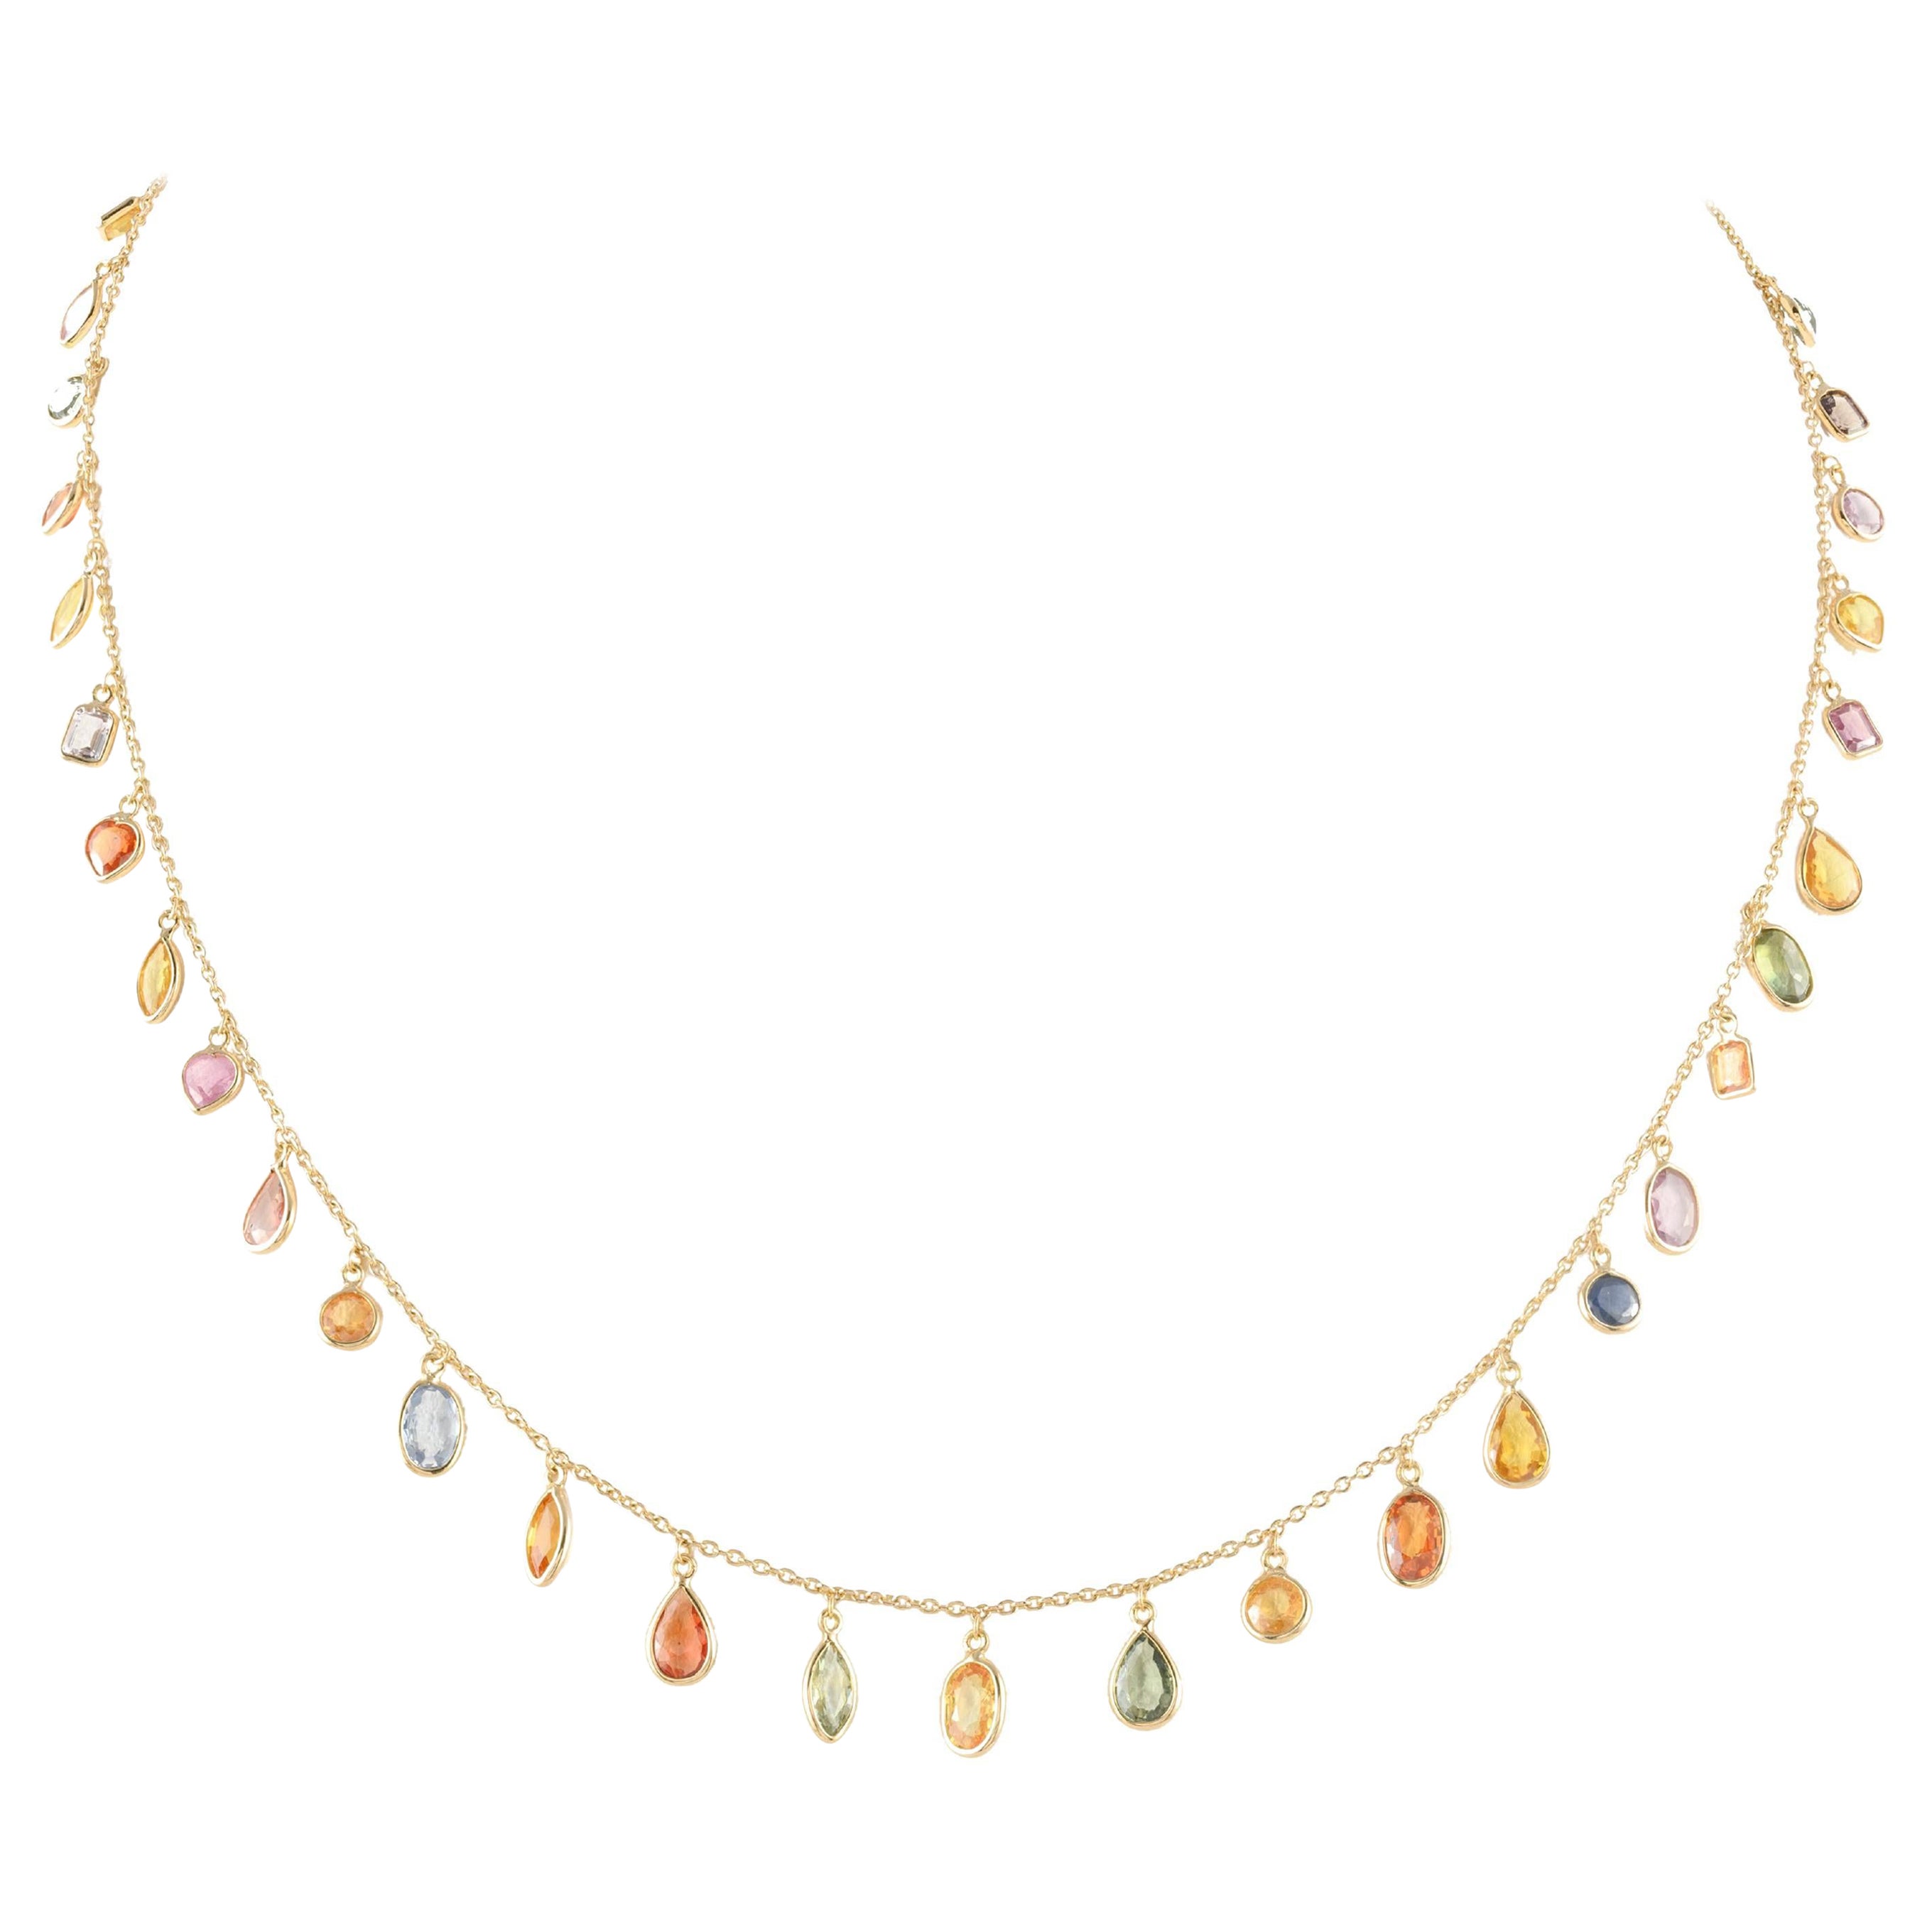 Colorful 18k Yellow Gold Dangling Multi Sapphire Chain Necklace, Bridesmaid Gift